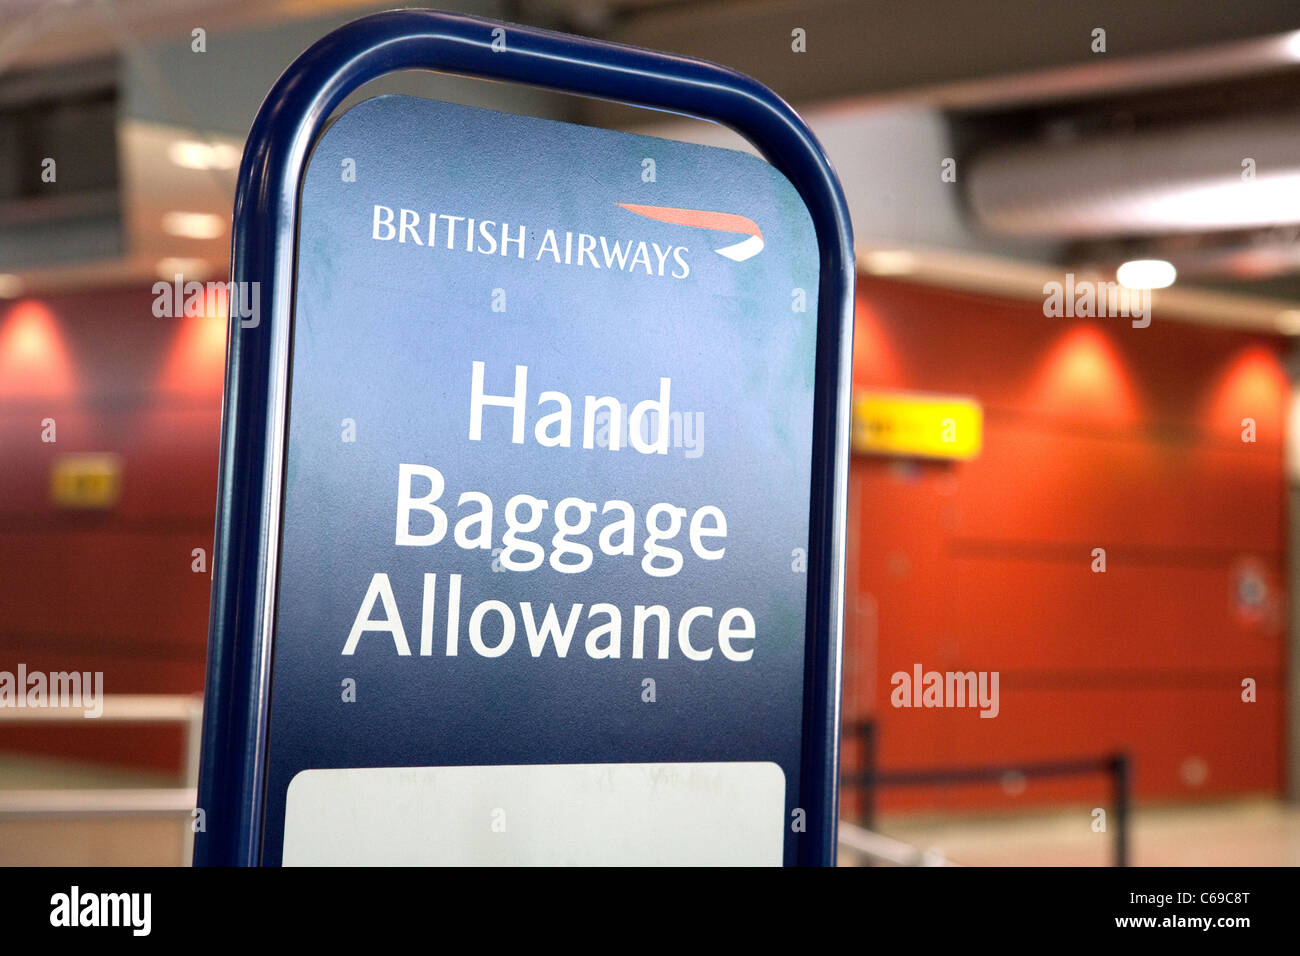 Hand Luggage Bag Size British Airways | Confederated Tribes of the Umatilla Indian Reservation